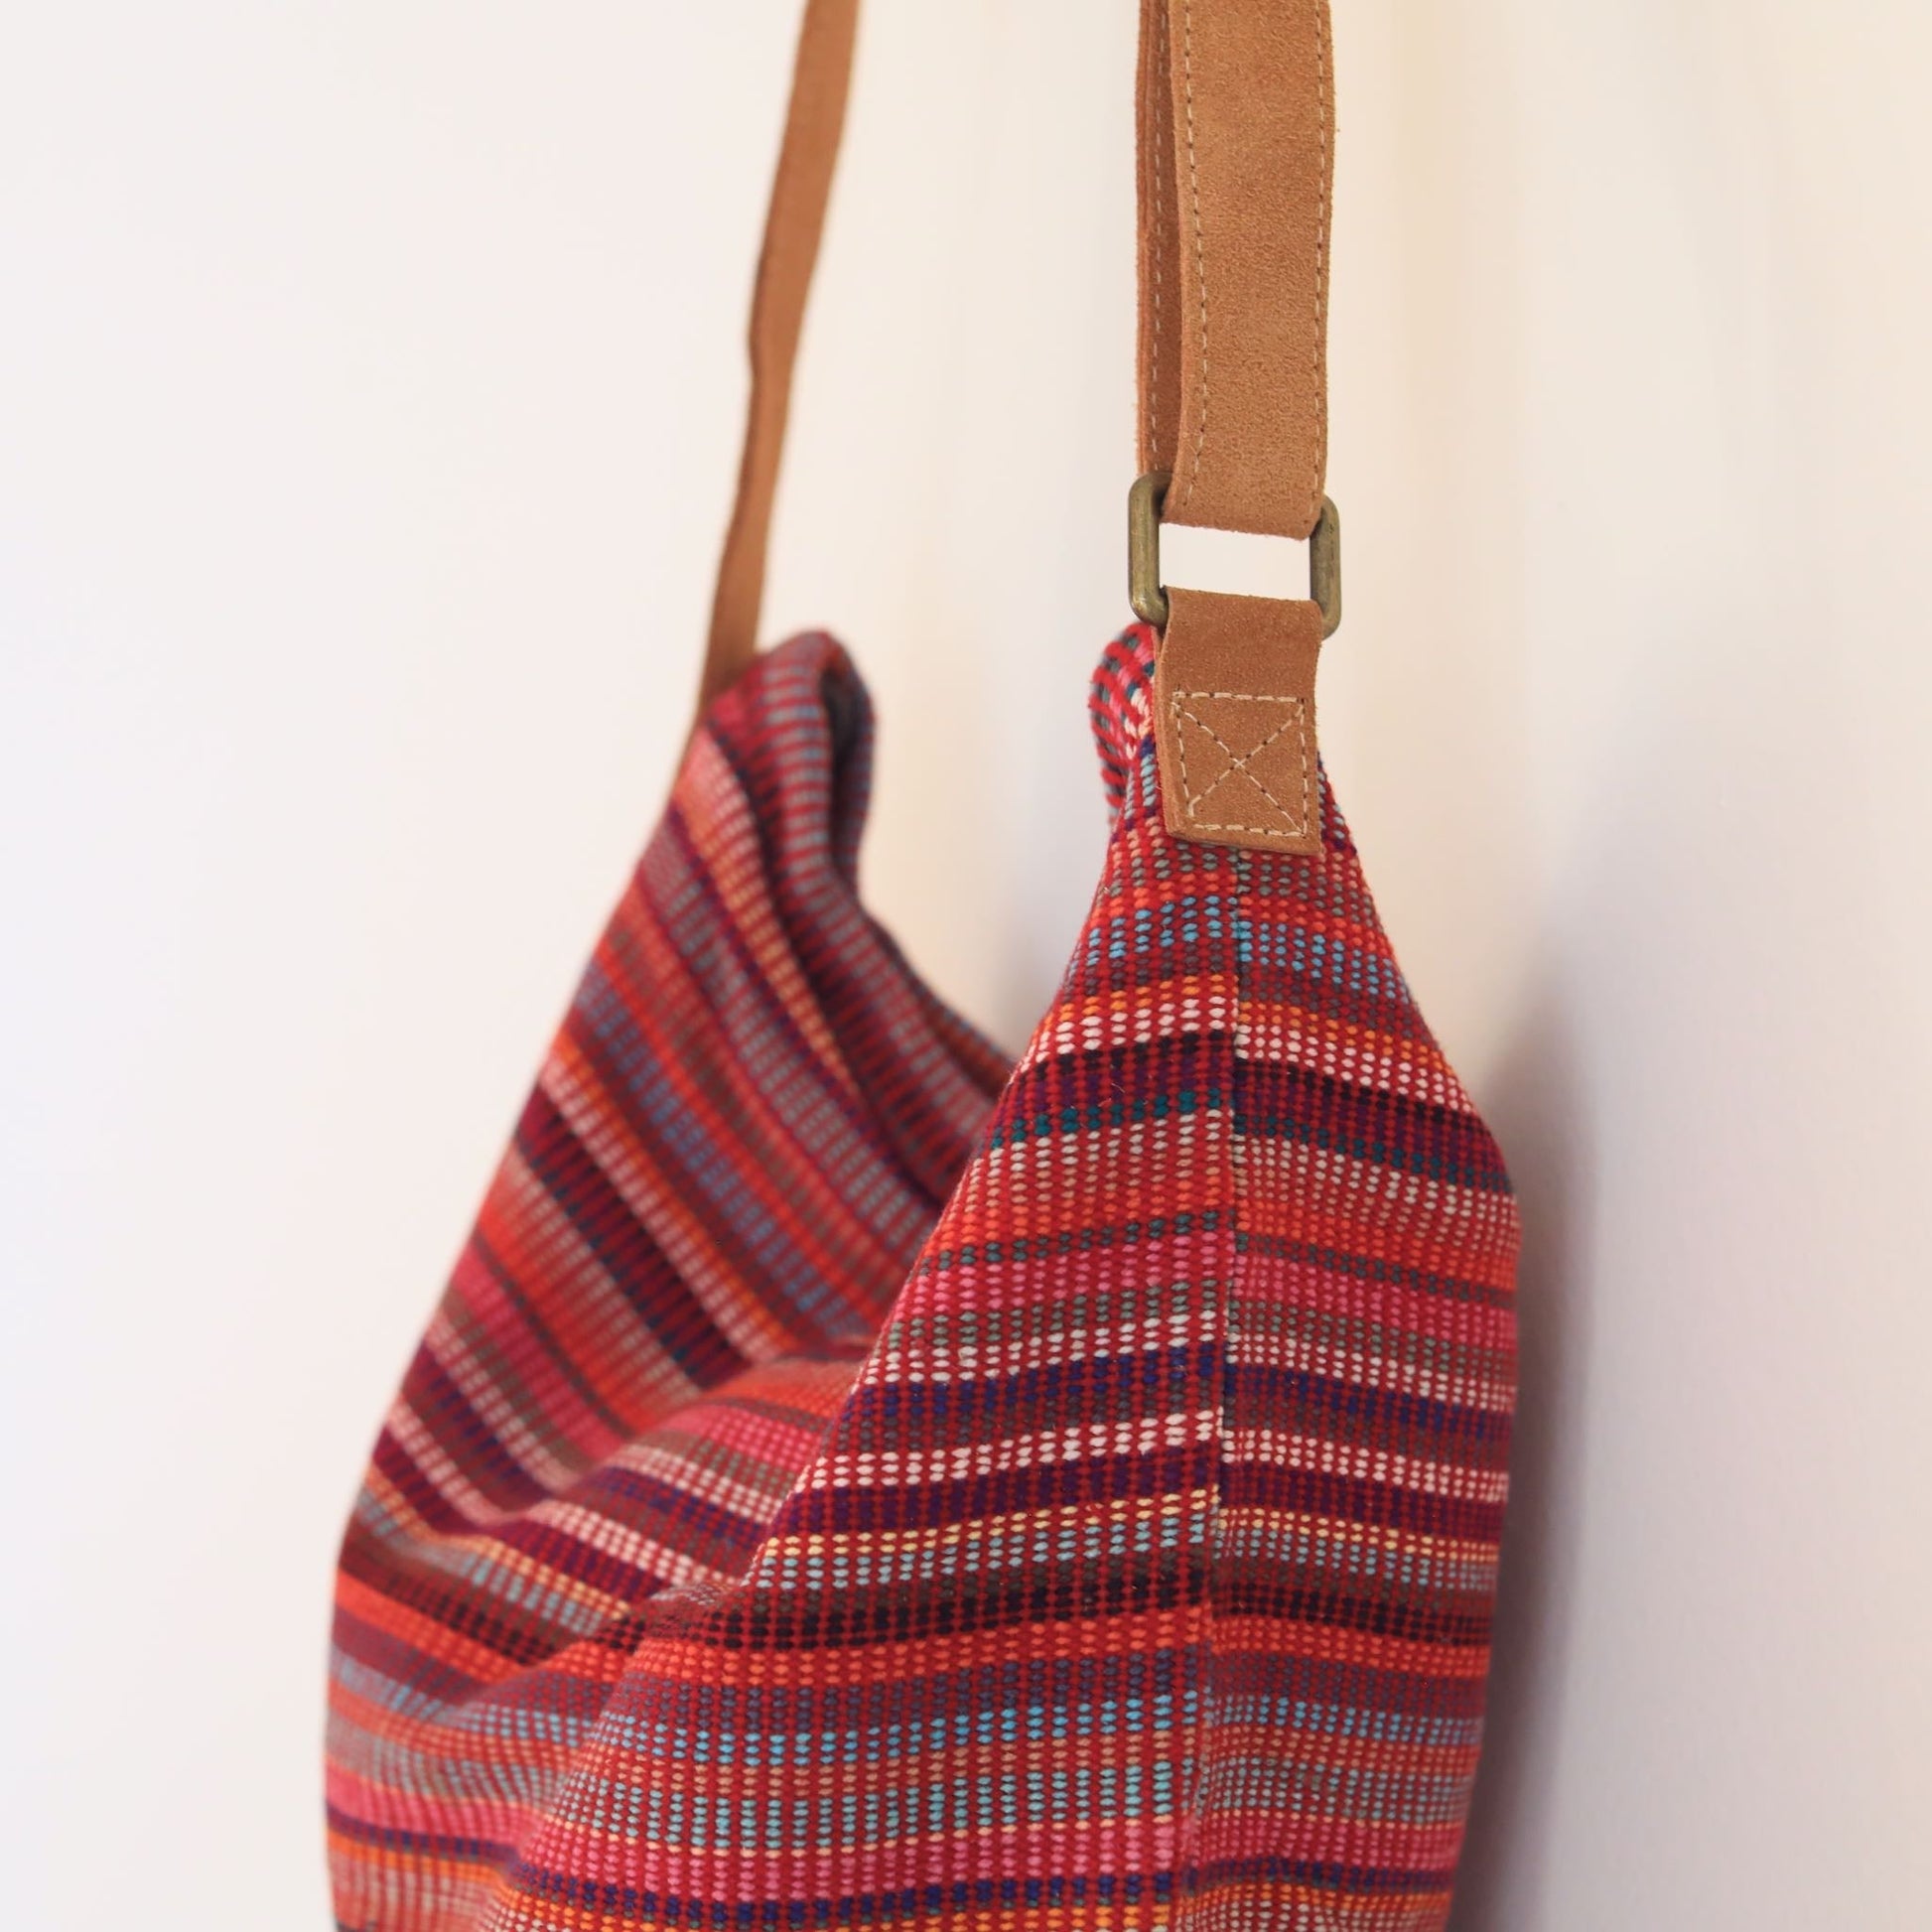 Wholesale Deals on women's handmade bags: Nepal WOVEN fair trade brand - Ganapati Crafts Co.